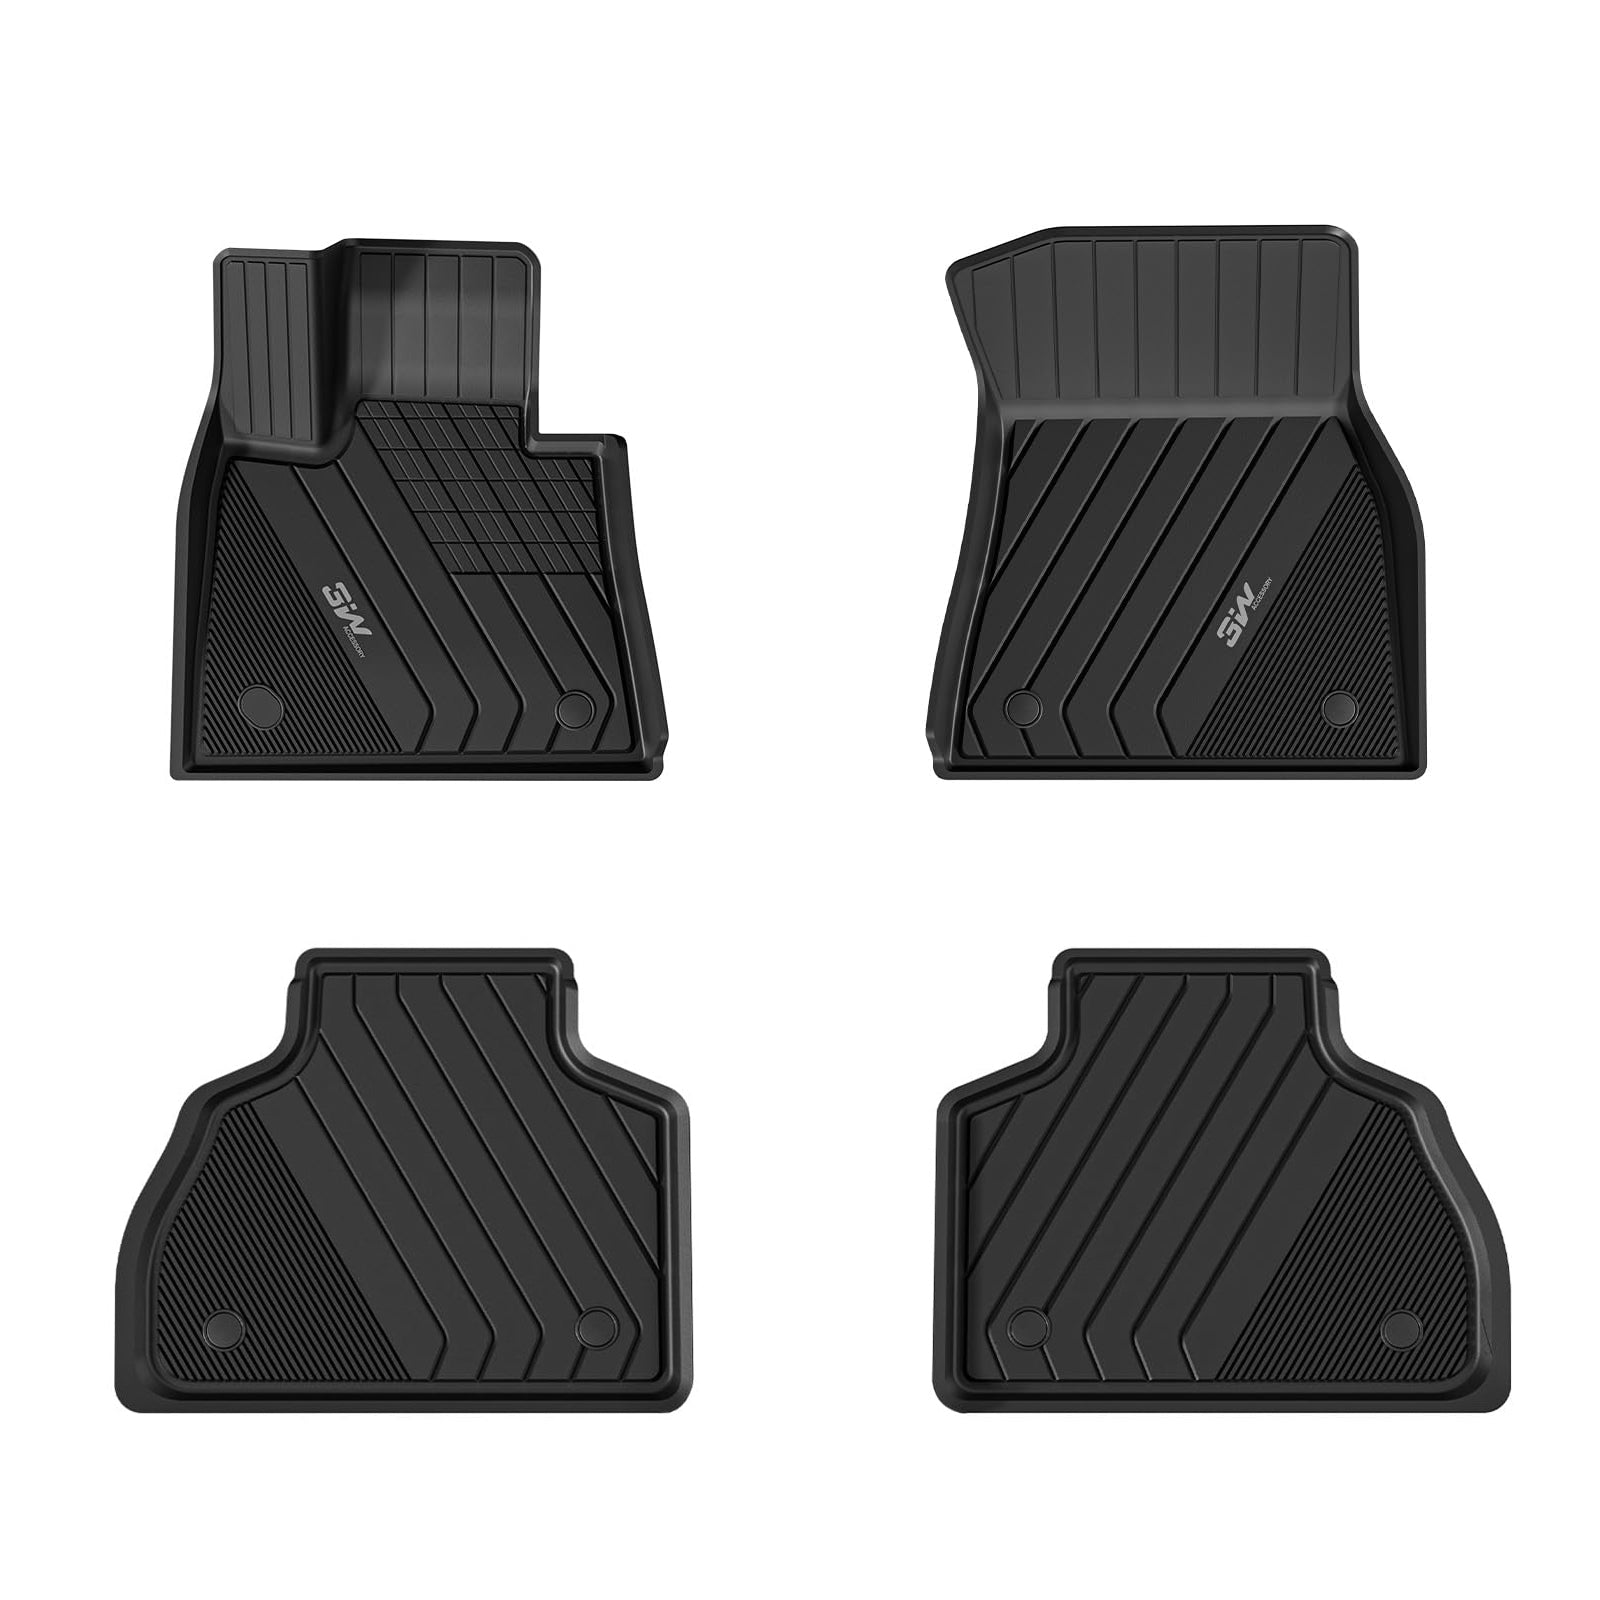 3W BMW X7 2020-2023 6 Seats 1st & 2nd Row Custom Floor Mats TPE Material & All-Weather Protection Vehicles & Parts 3W 2020-2023 X7 2020-2023 6 Seats 1st&2nd Row Mats